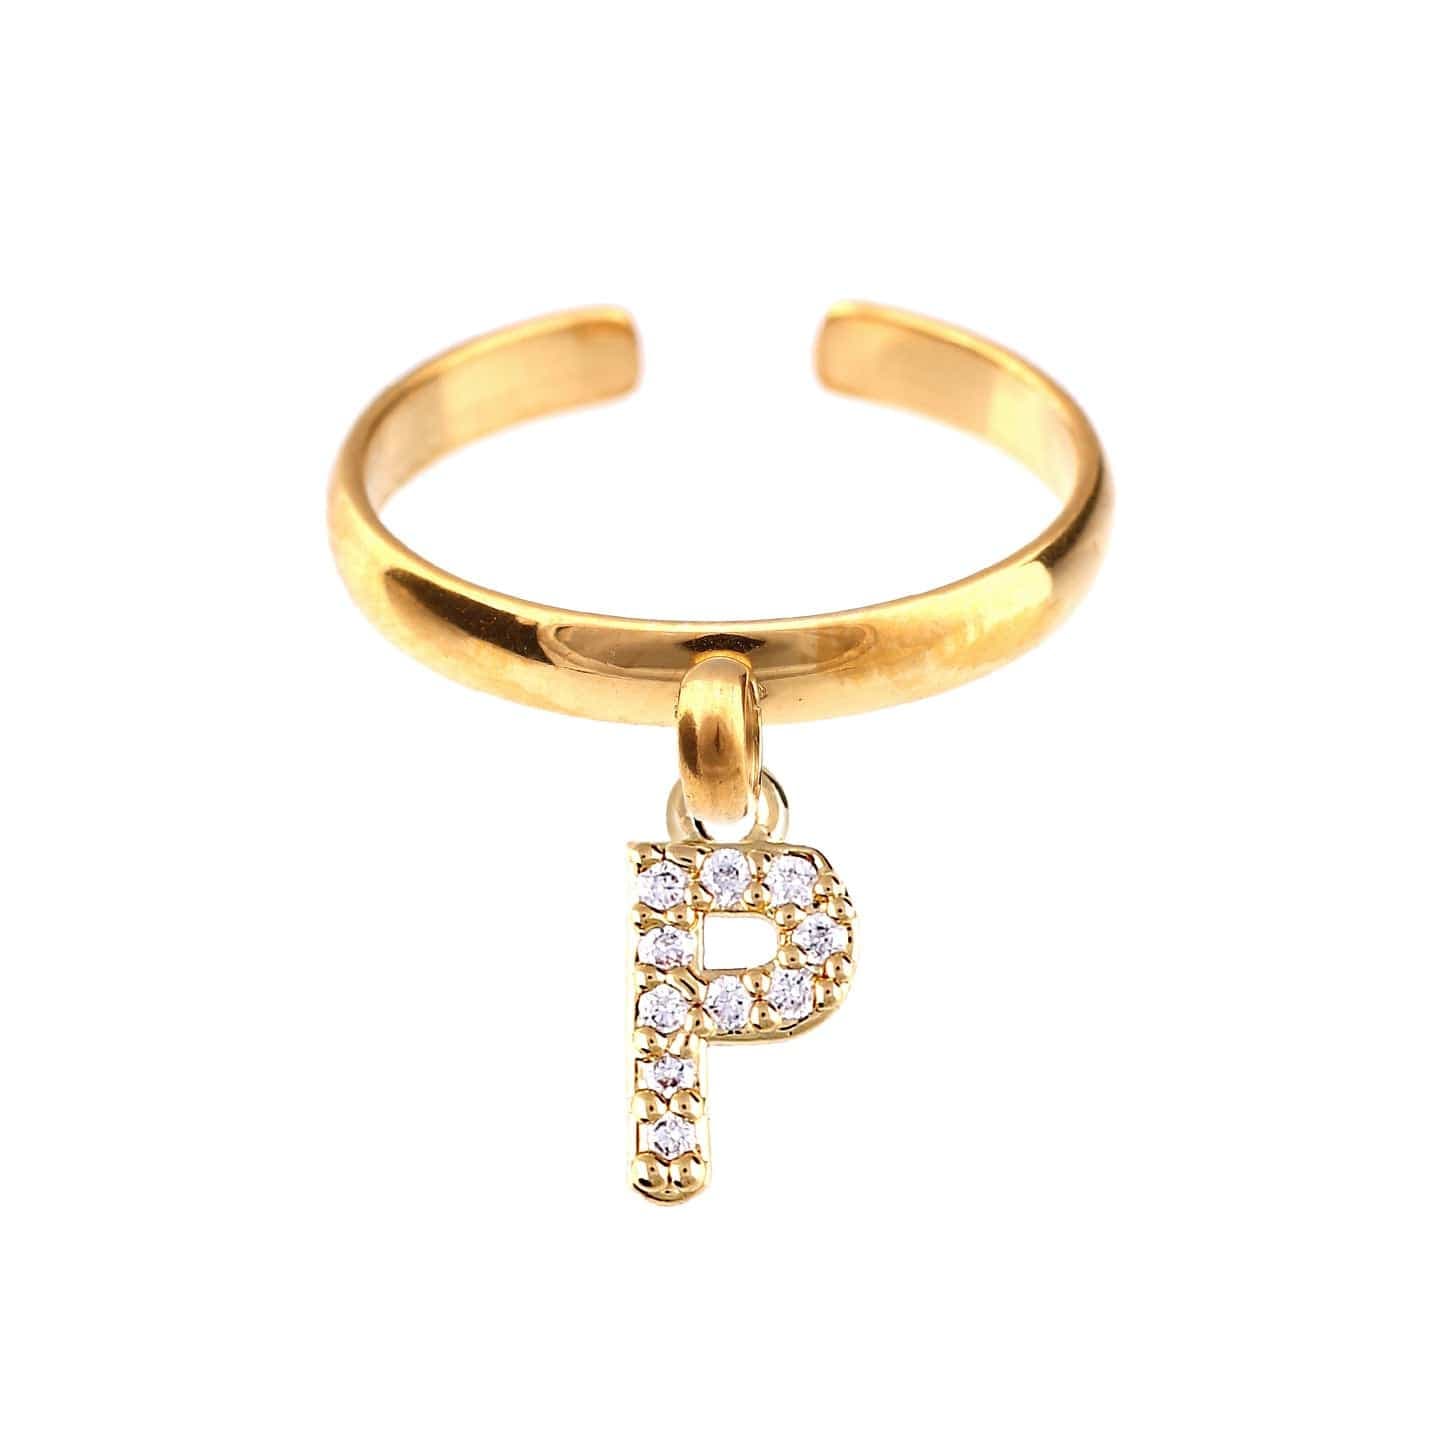 Letter P 14KT Yellow Gold Initial Ring